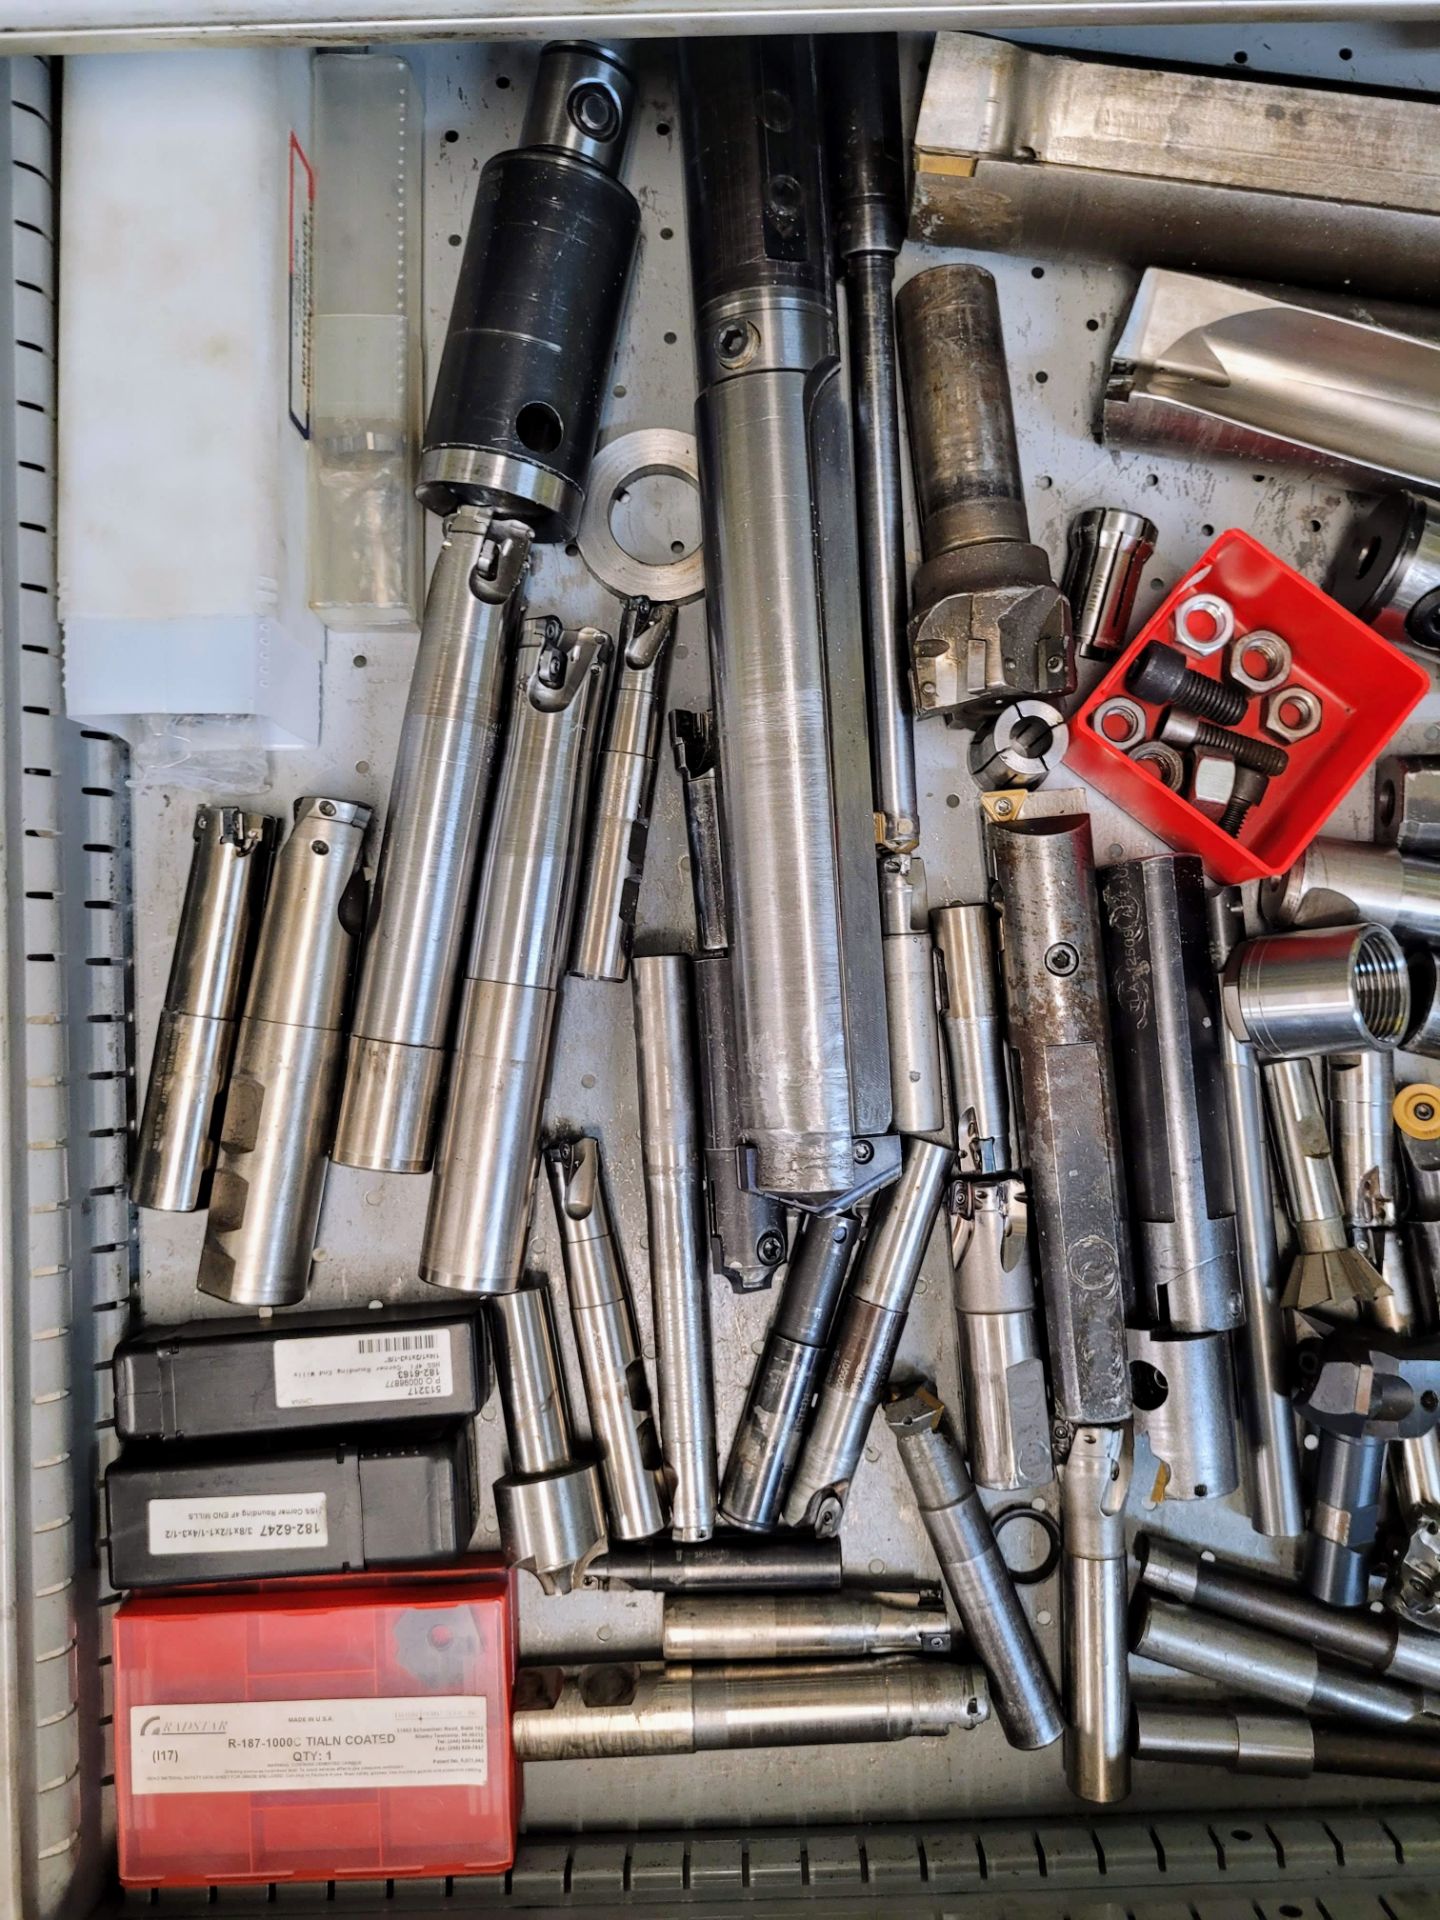 CONTENTS OF (1) TOOL CABINET DRAWER INCLUDING CARBIDE INSERTS, INSERT CUTTING BARS, BORING BARS, - Image 2 of 3